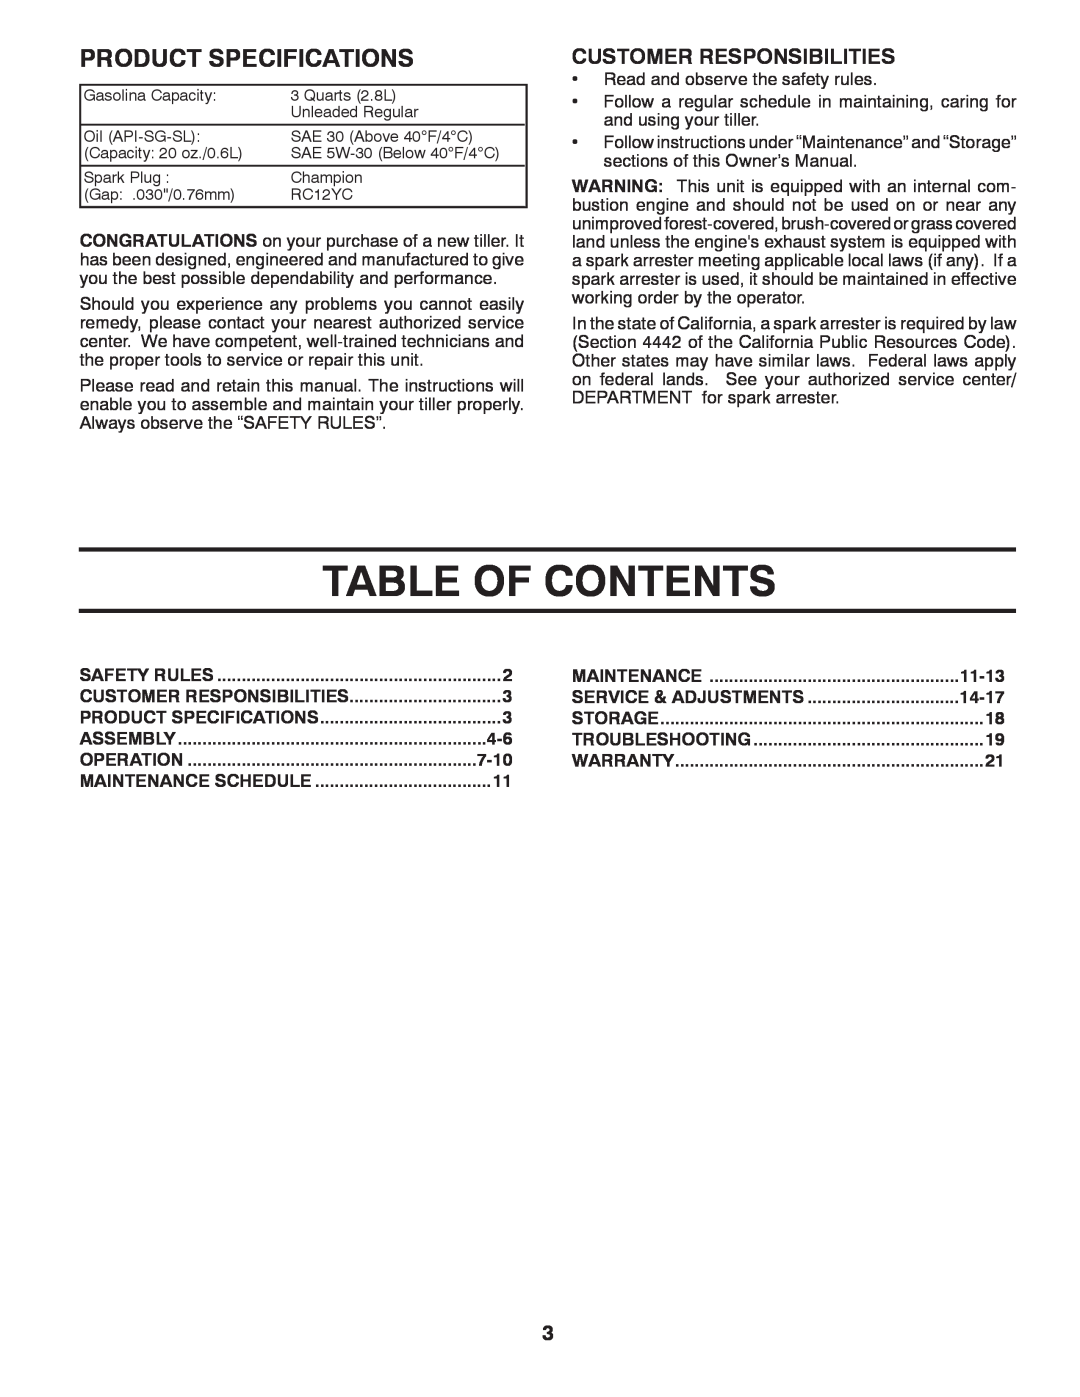 Poulan PRRT850 manual Table Of Contents, Product Specifications, Customer Responsibilities 